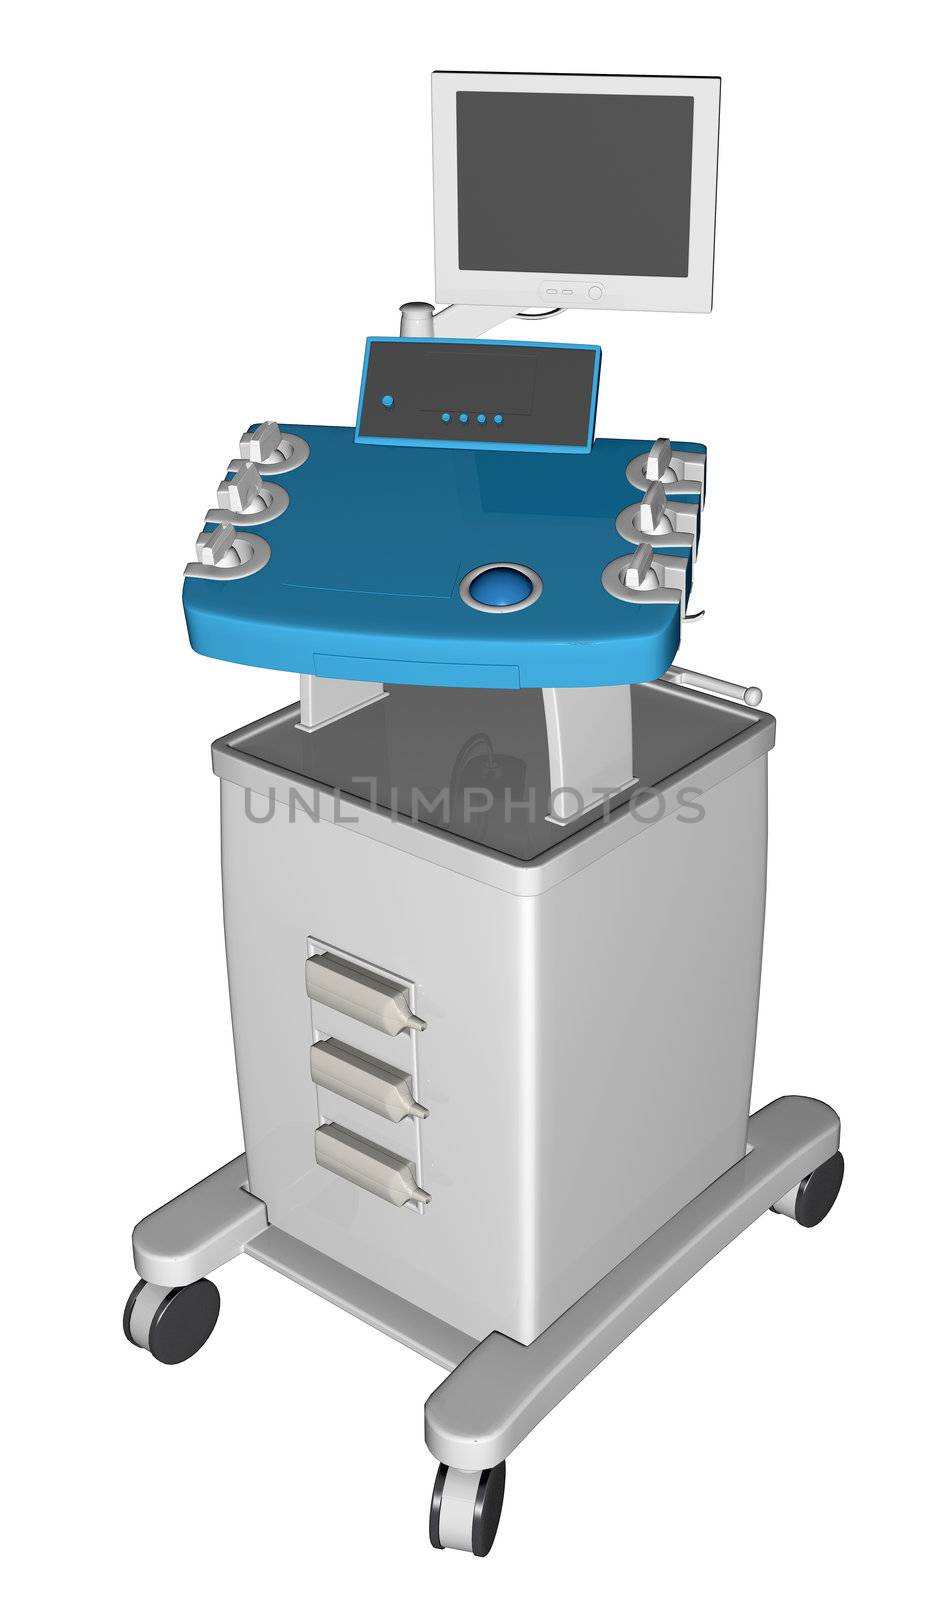 EGC or electrocardiogram device or cardiograph, 3D illustration, isolated against a white background.